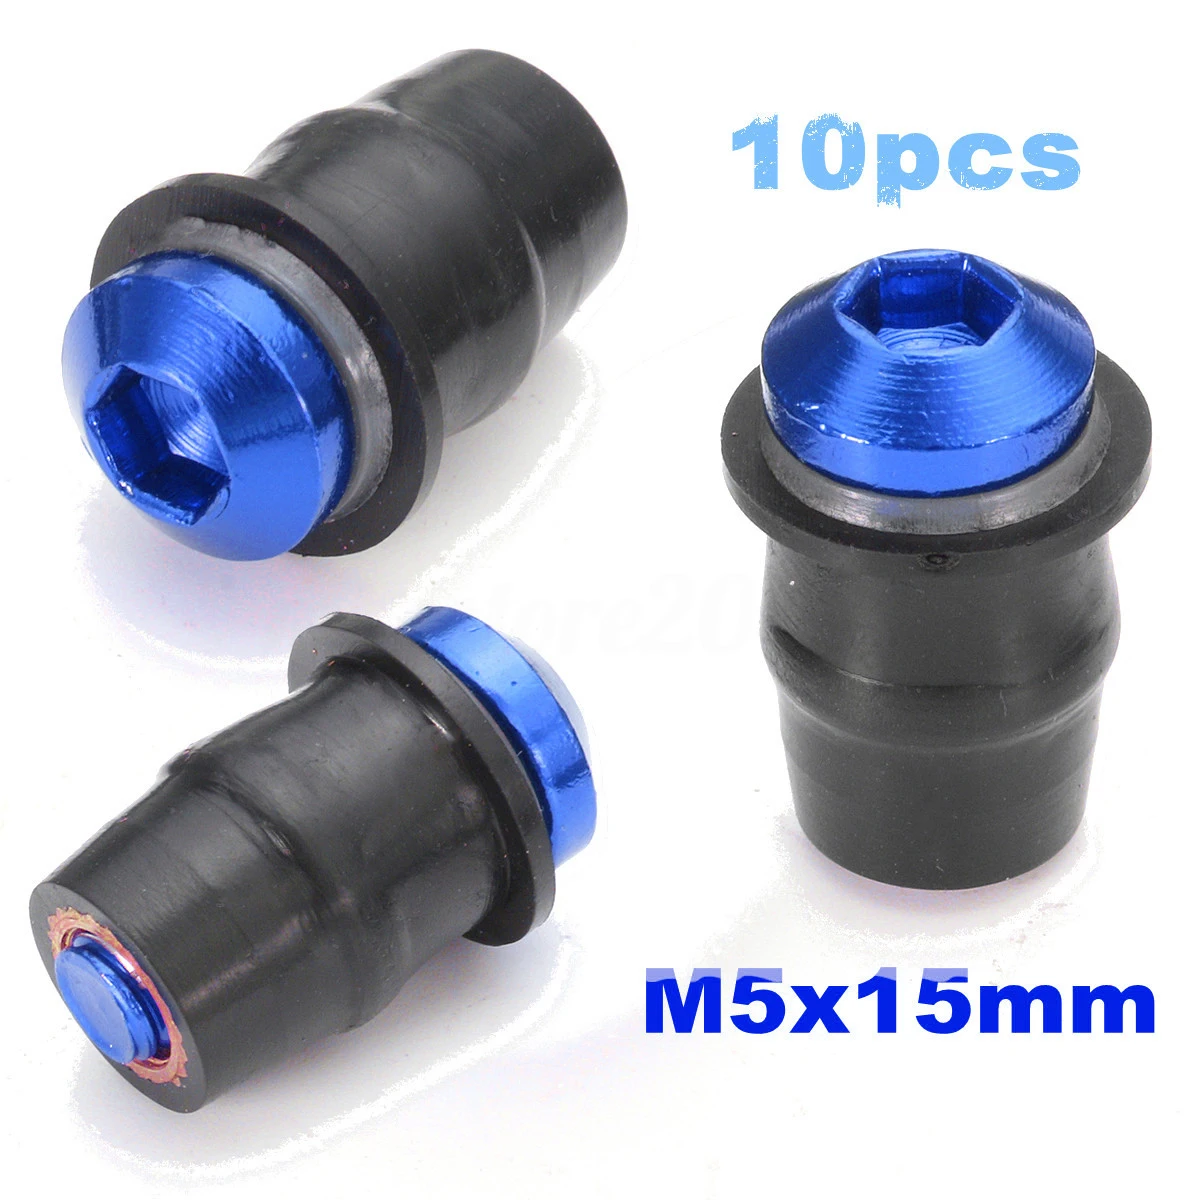 

10pcs Motorcycle M5 15mm Metric Rubber Well Nuts Windscreen Fairing Cowl Anodized Windshield Nut Bolt Screw Kit